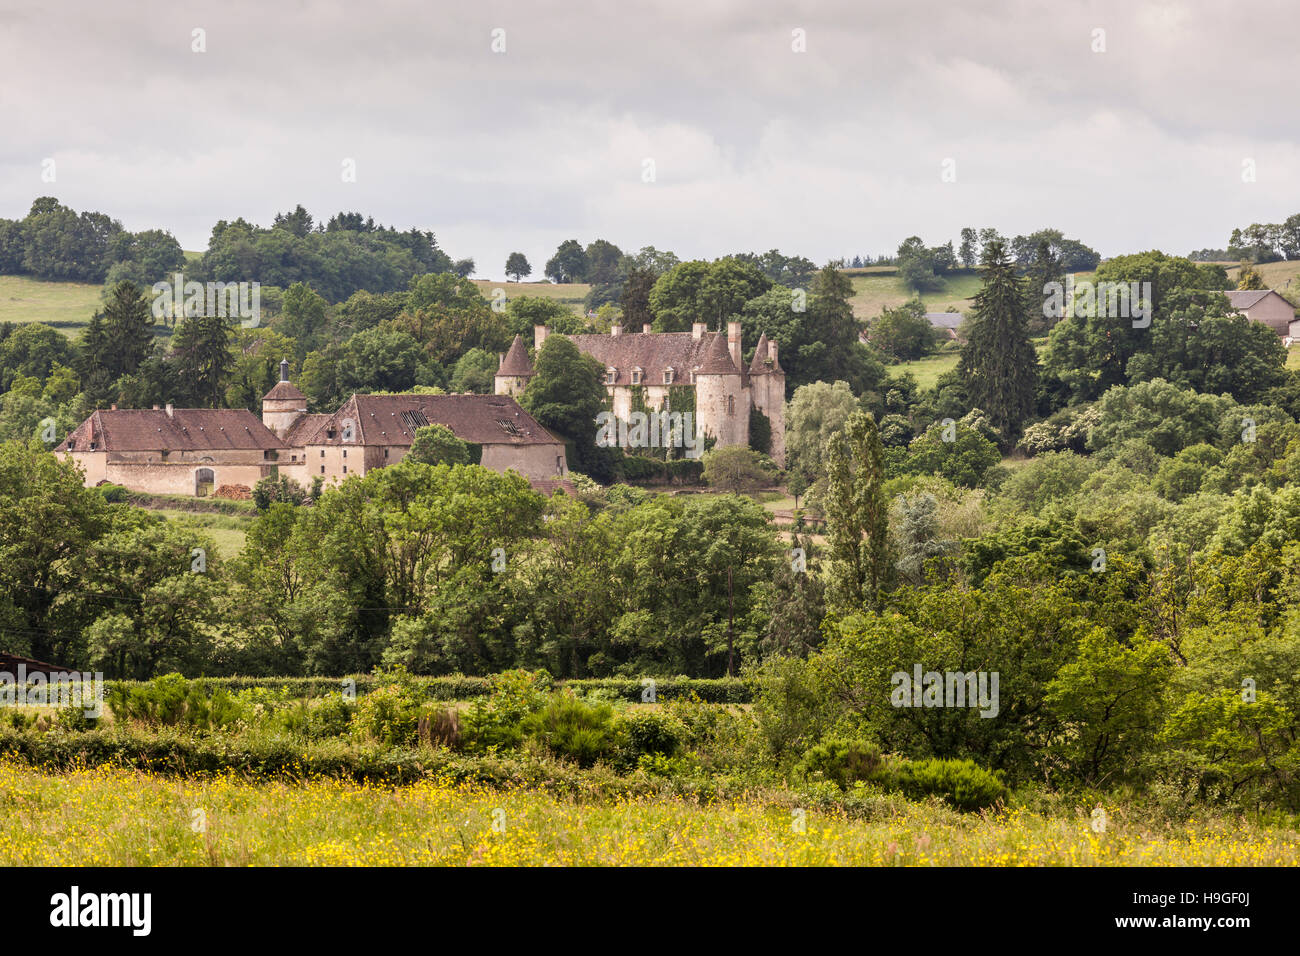 Chateau de Chassy in the Morvan area of Burgundy, France. Stock Photo